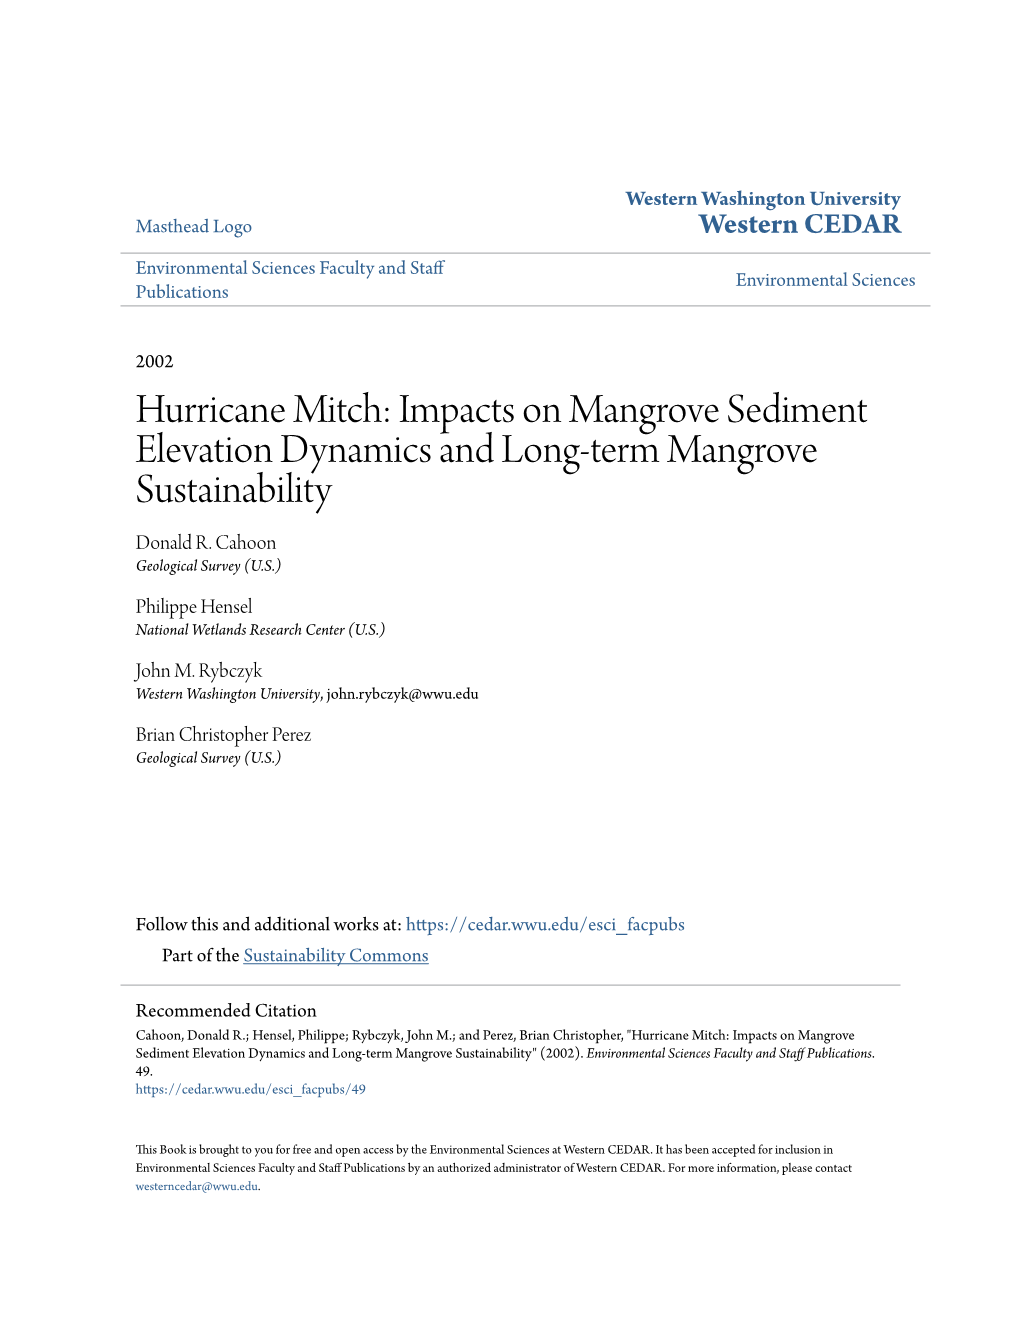 Hurricane Mitch: Impacts on Mangrove Sediment Elevation Dynamics and Long-Term Mangrove Sustainability Donald R